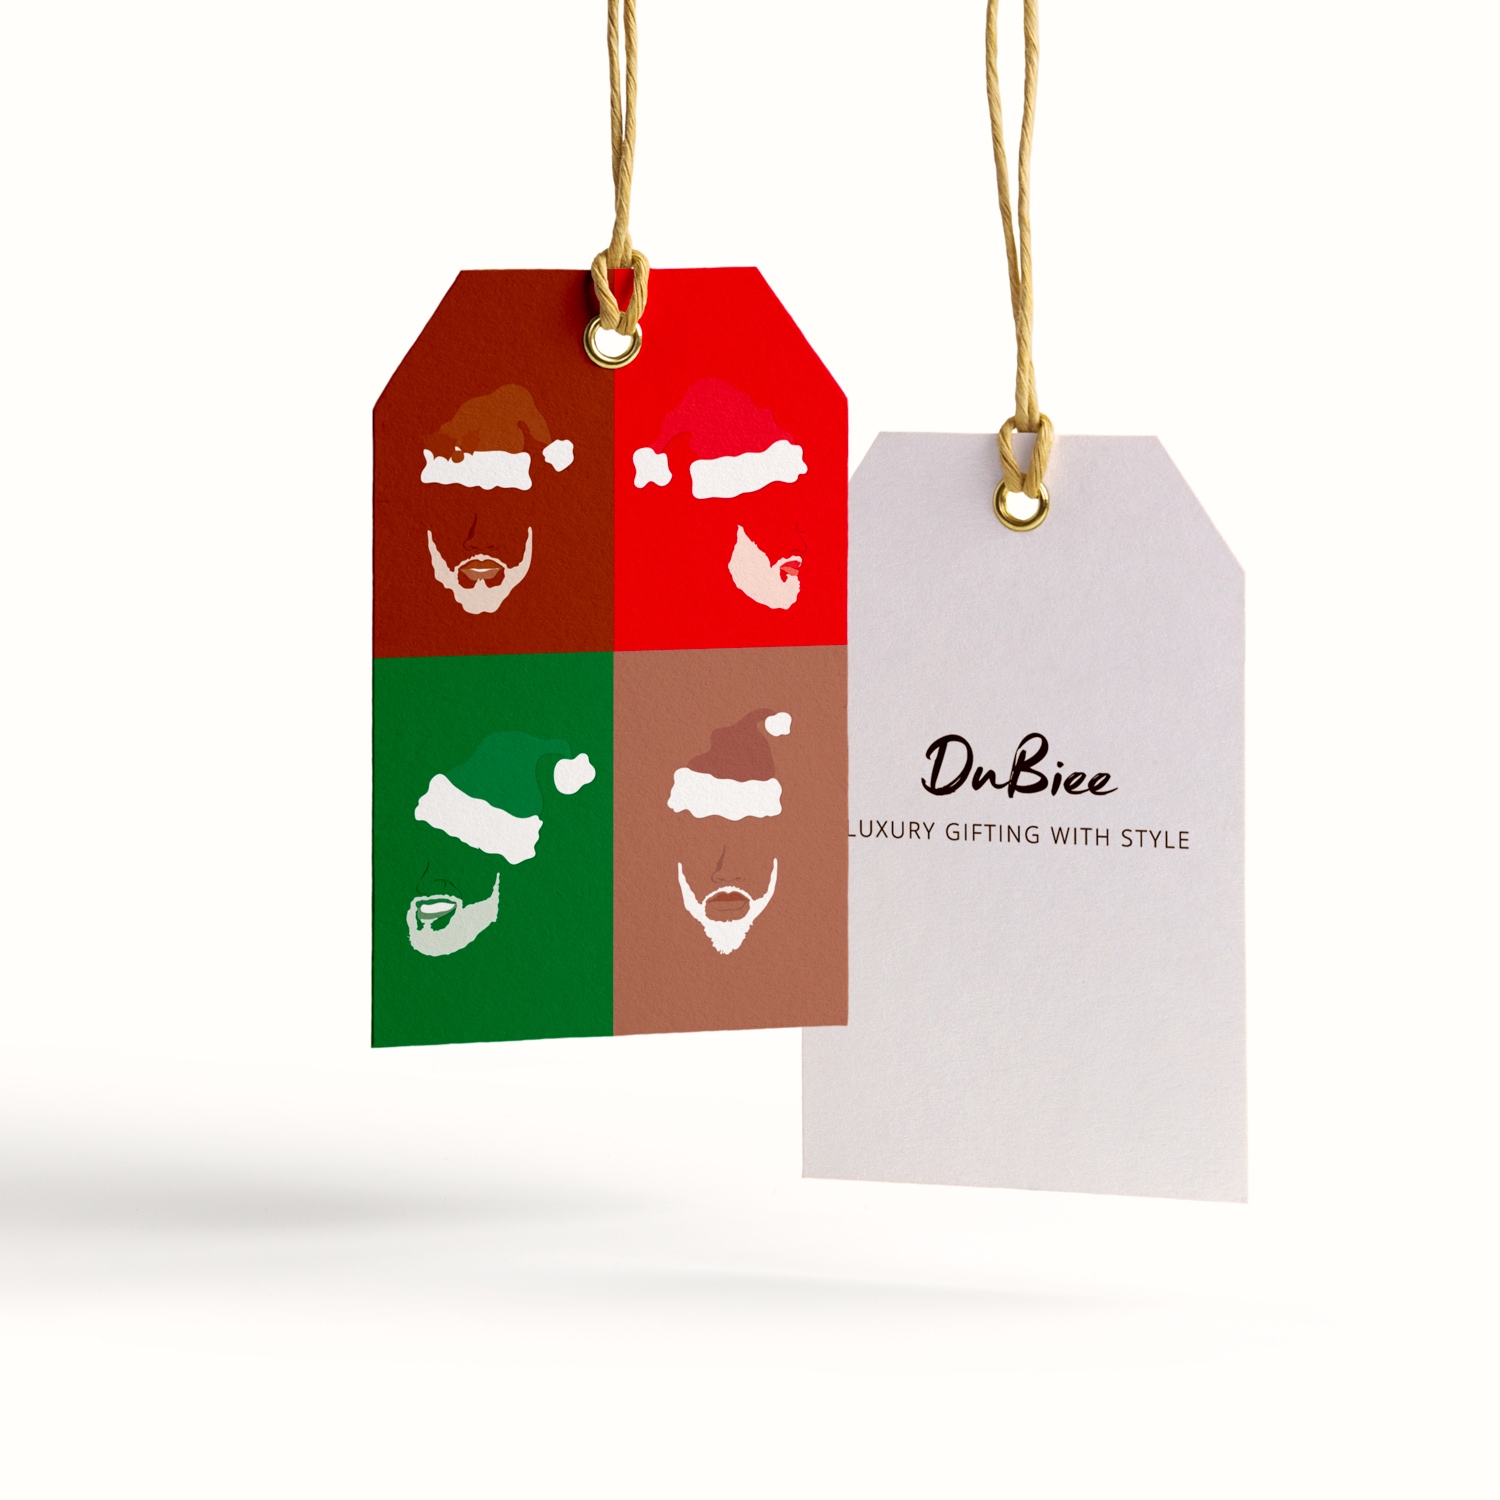 DuBiee Is The Inclusive Holiday Gift Wrap The Culture Has Been Waiting For